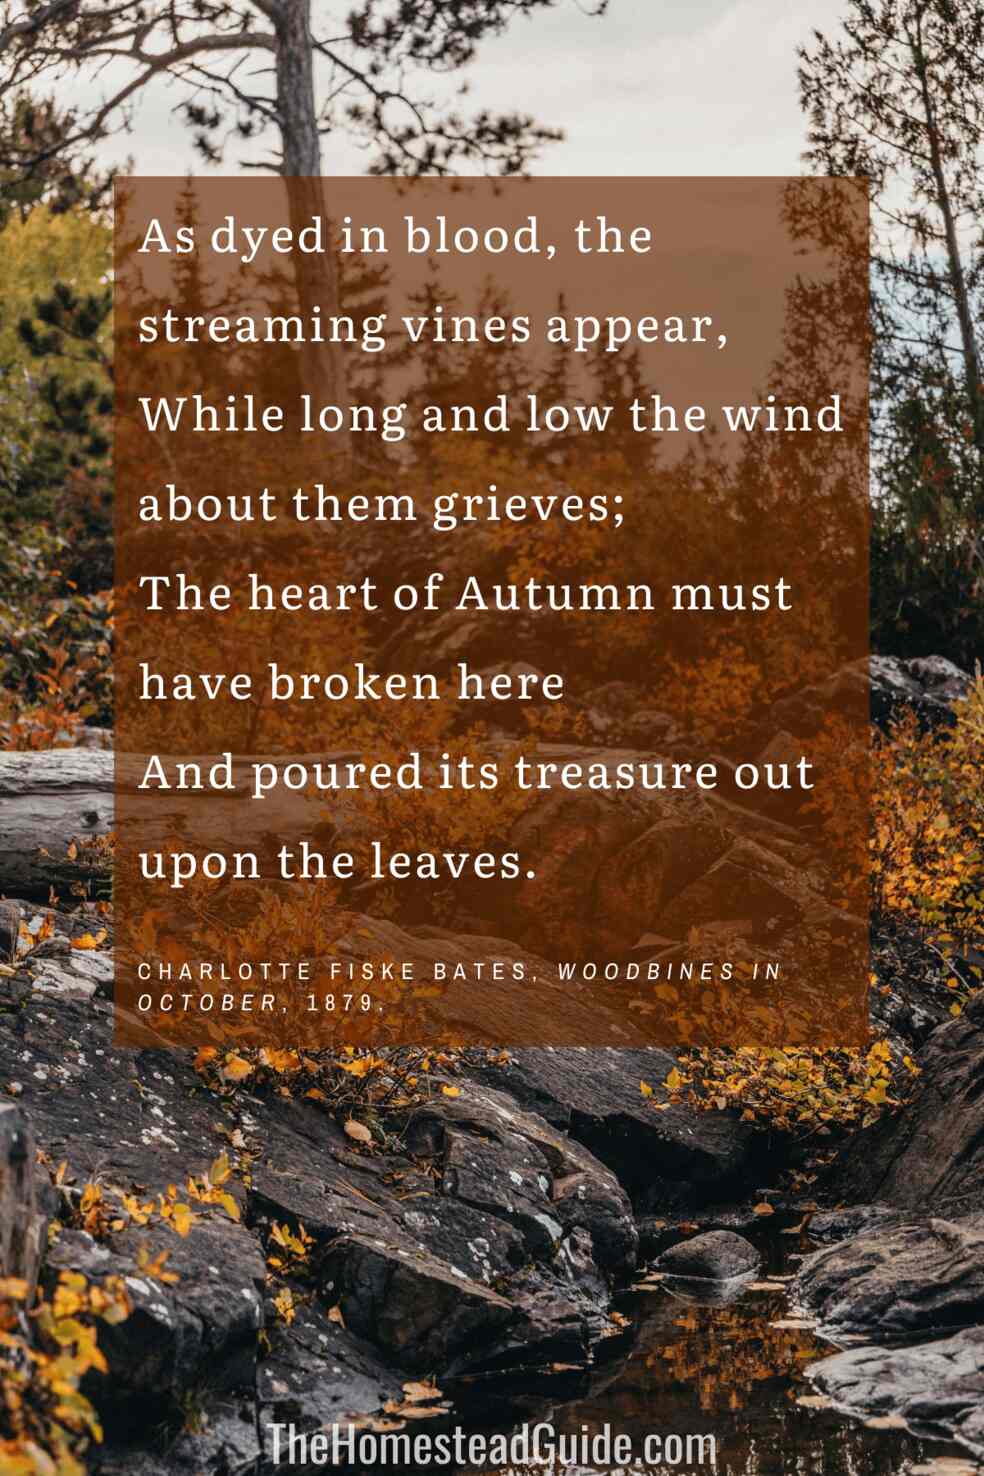 As dyed in blood, the streaming vines appear, While long and low the wind about them grieves; The heart of Autumn must have broken here And poured its treasure out upon the leaves. 